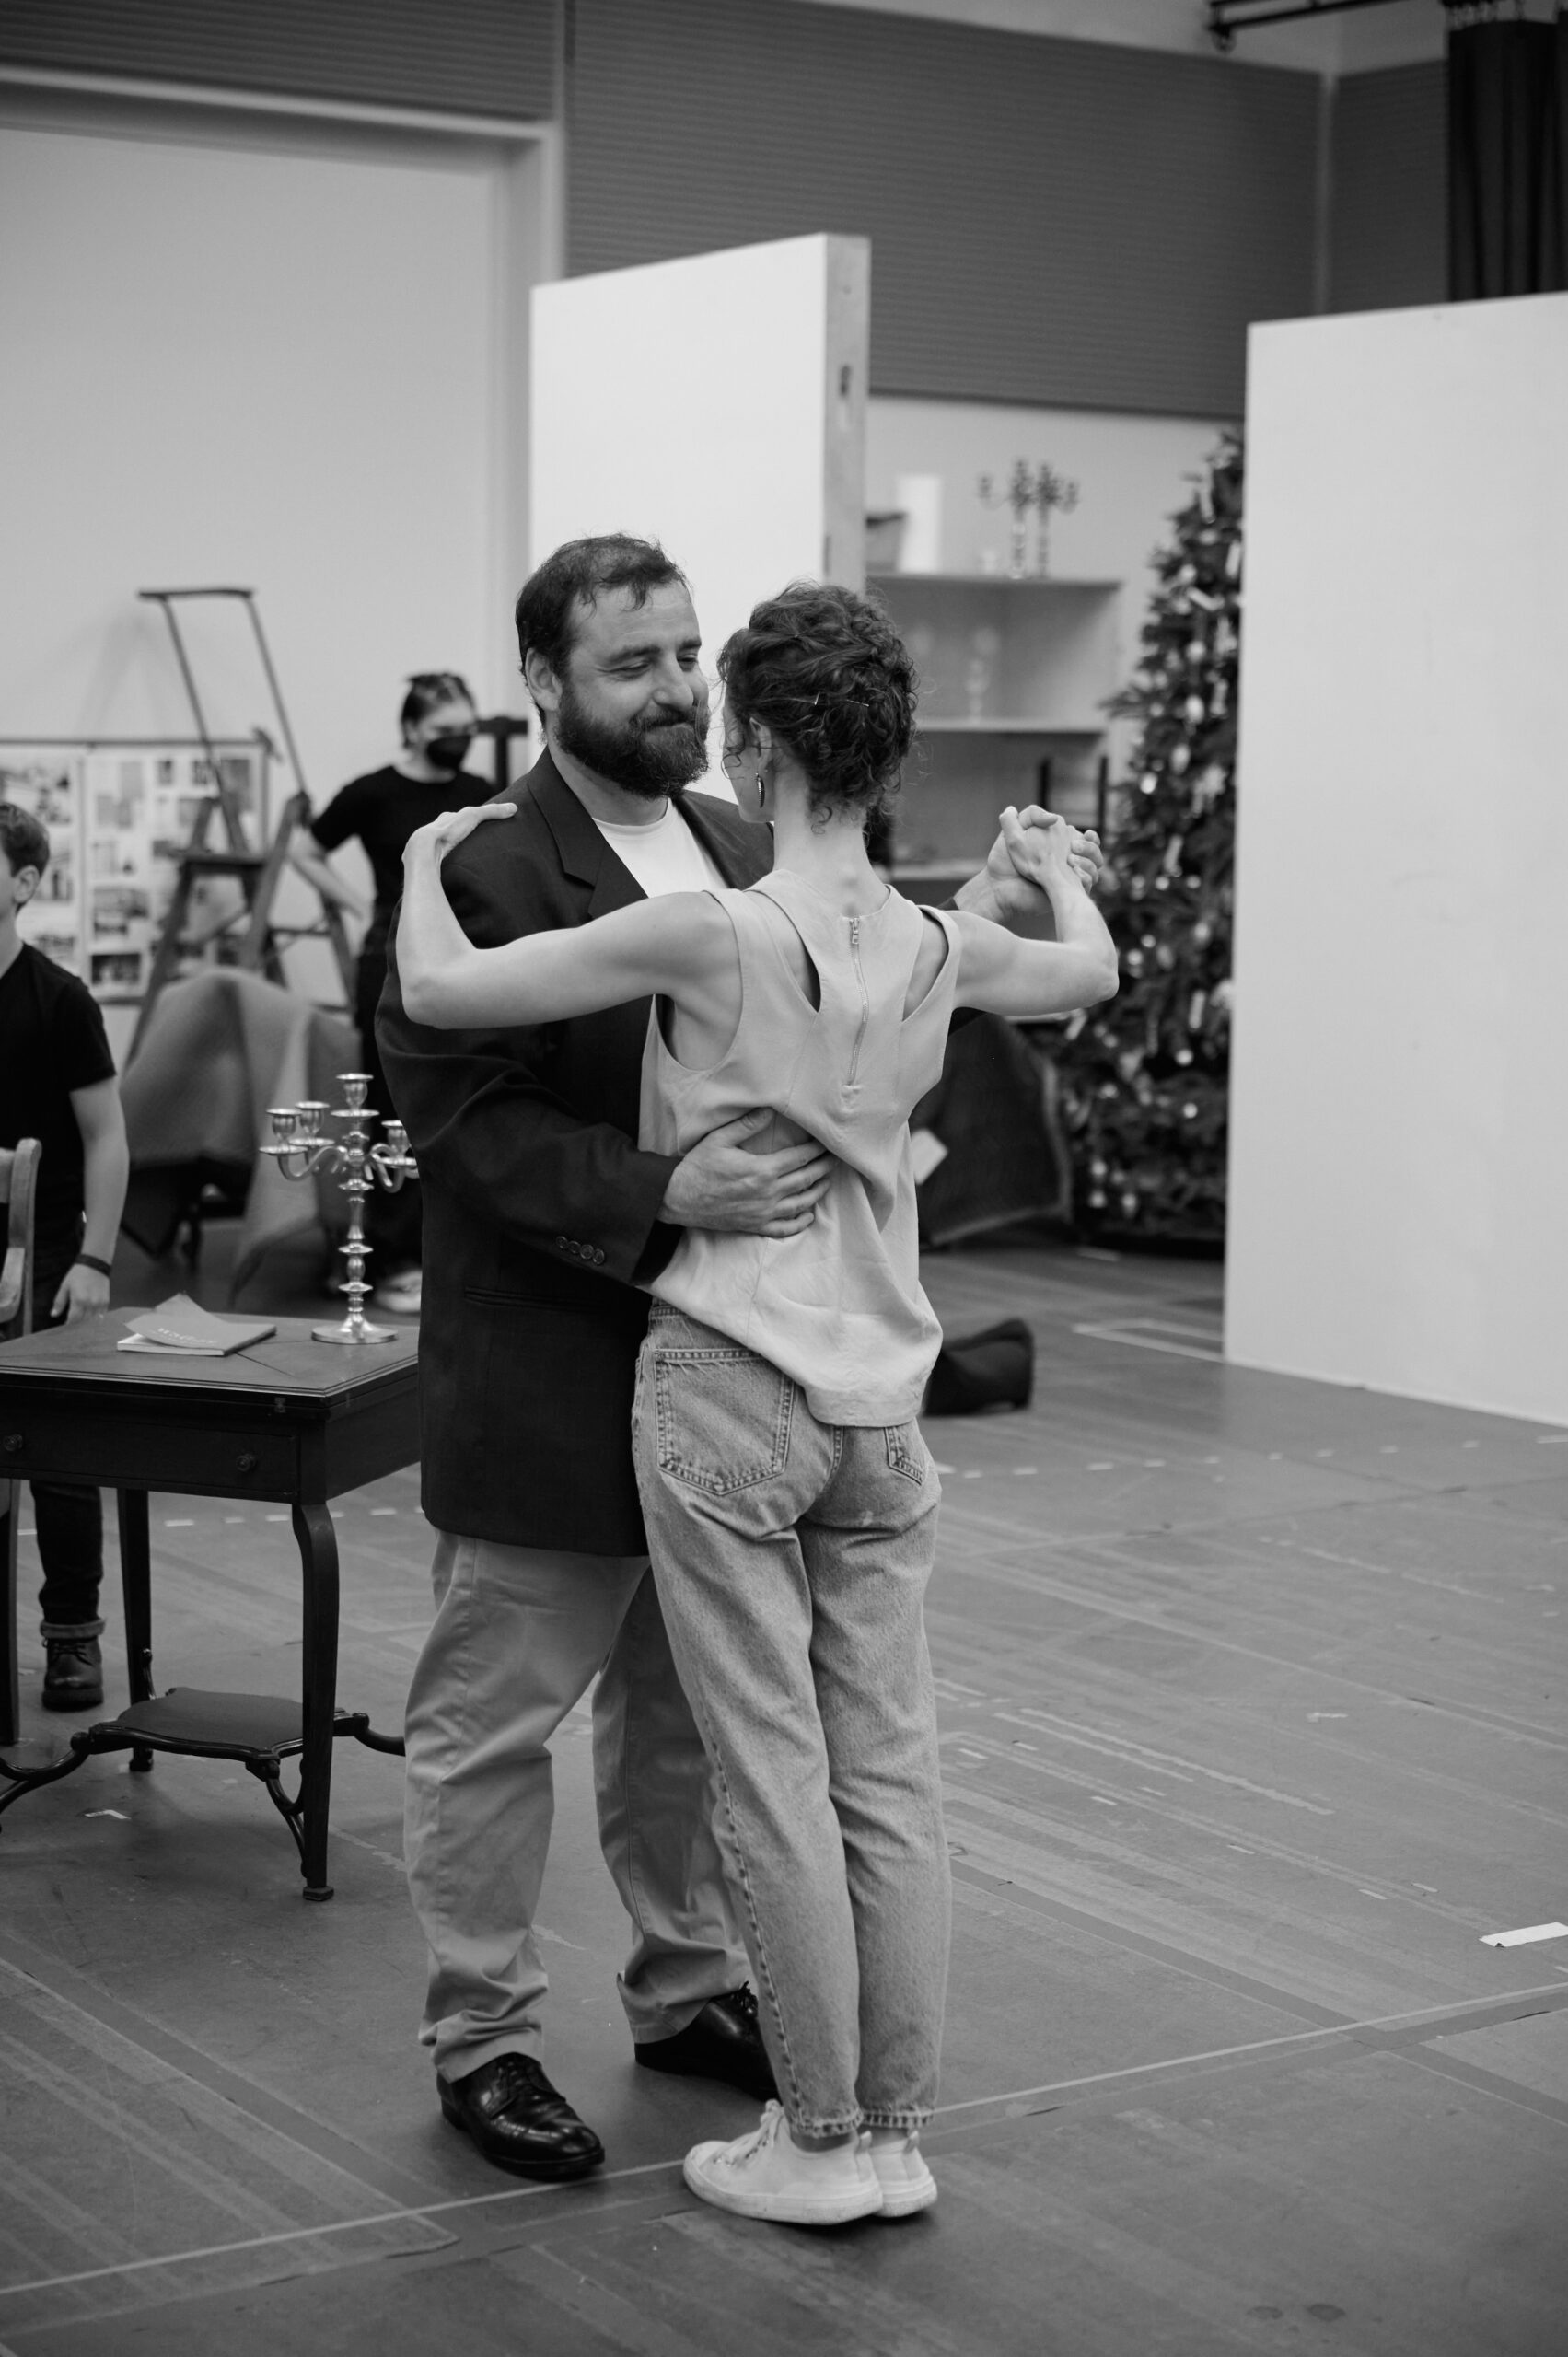 David Krumholtz and Faye Castelow in rehearsals for Leopoldstadt. Photo by Jenny Anderson.